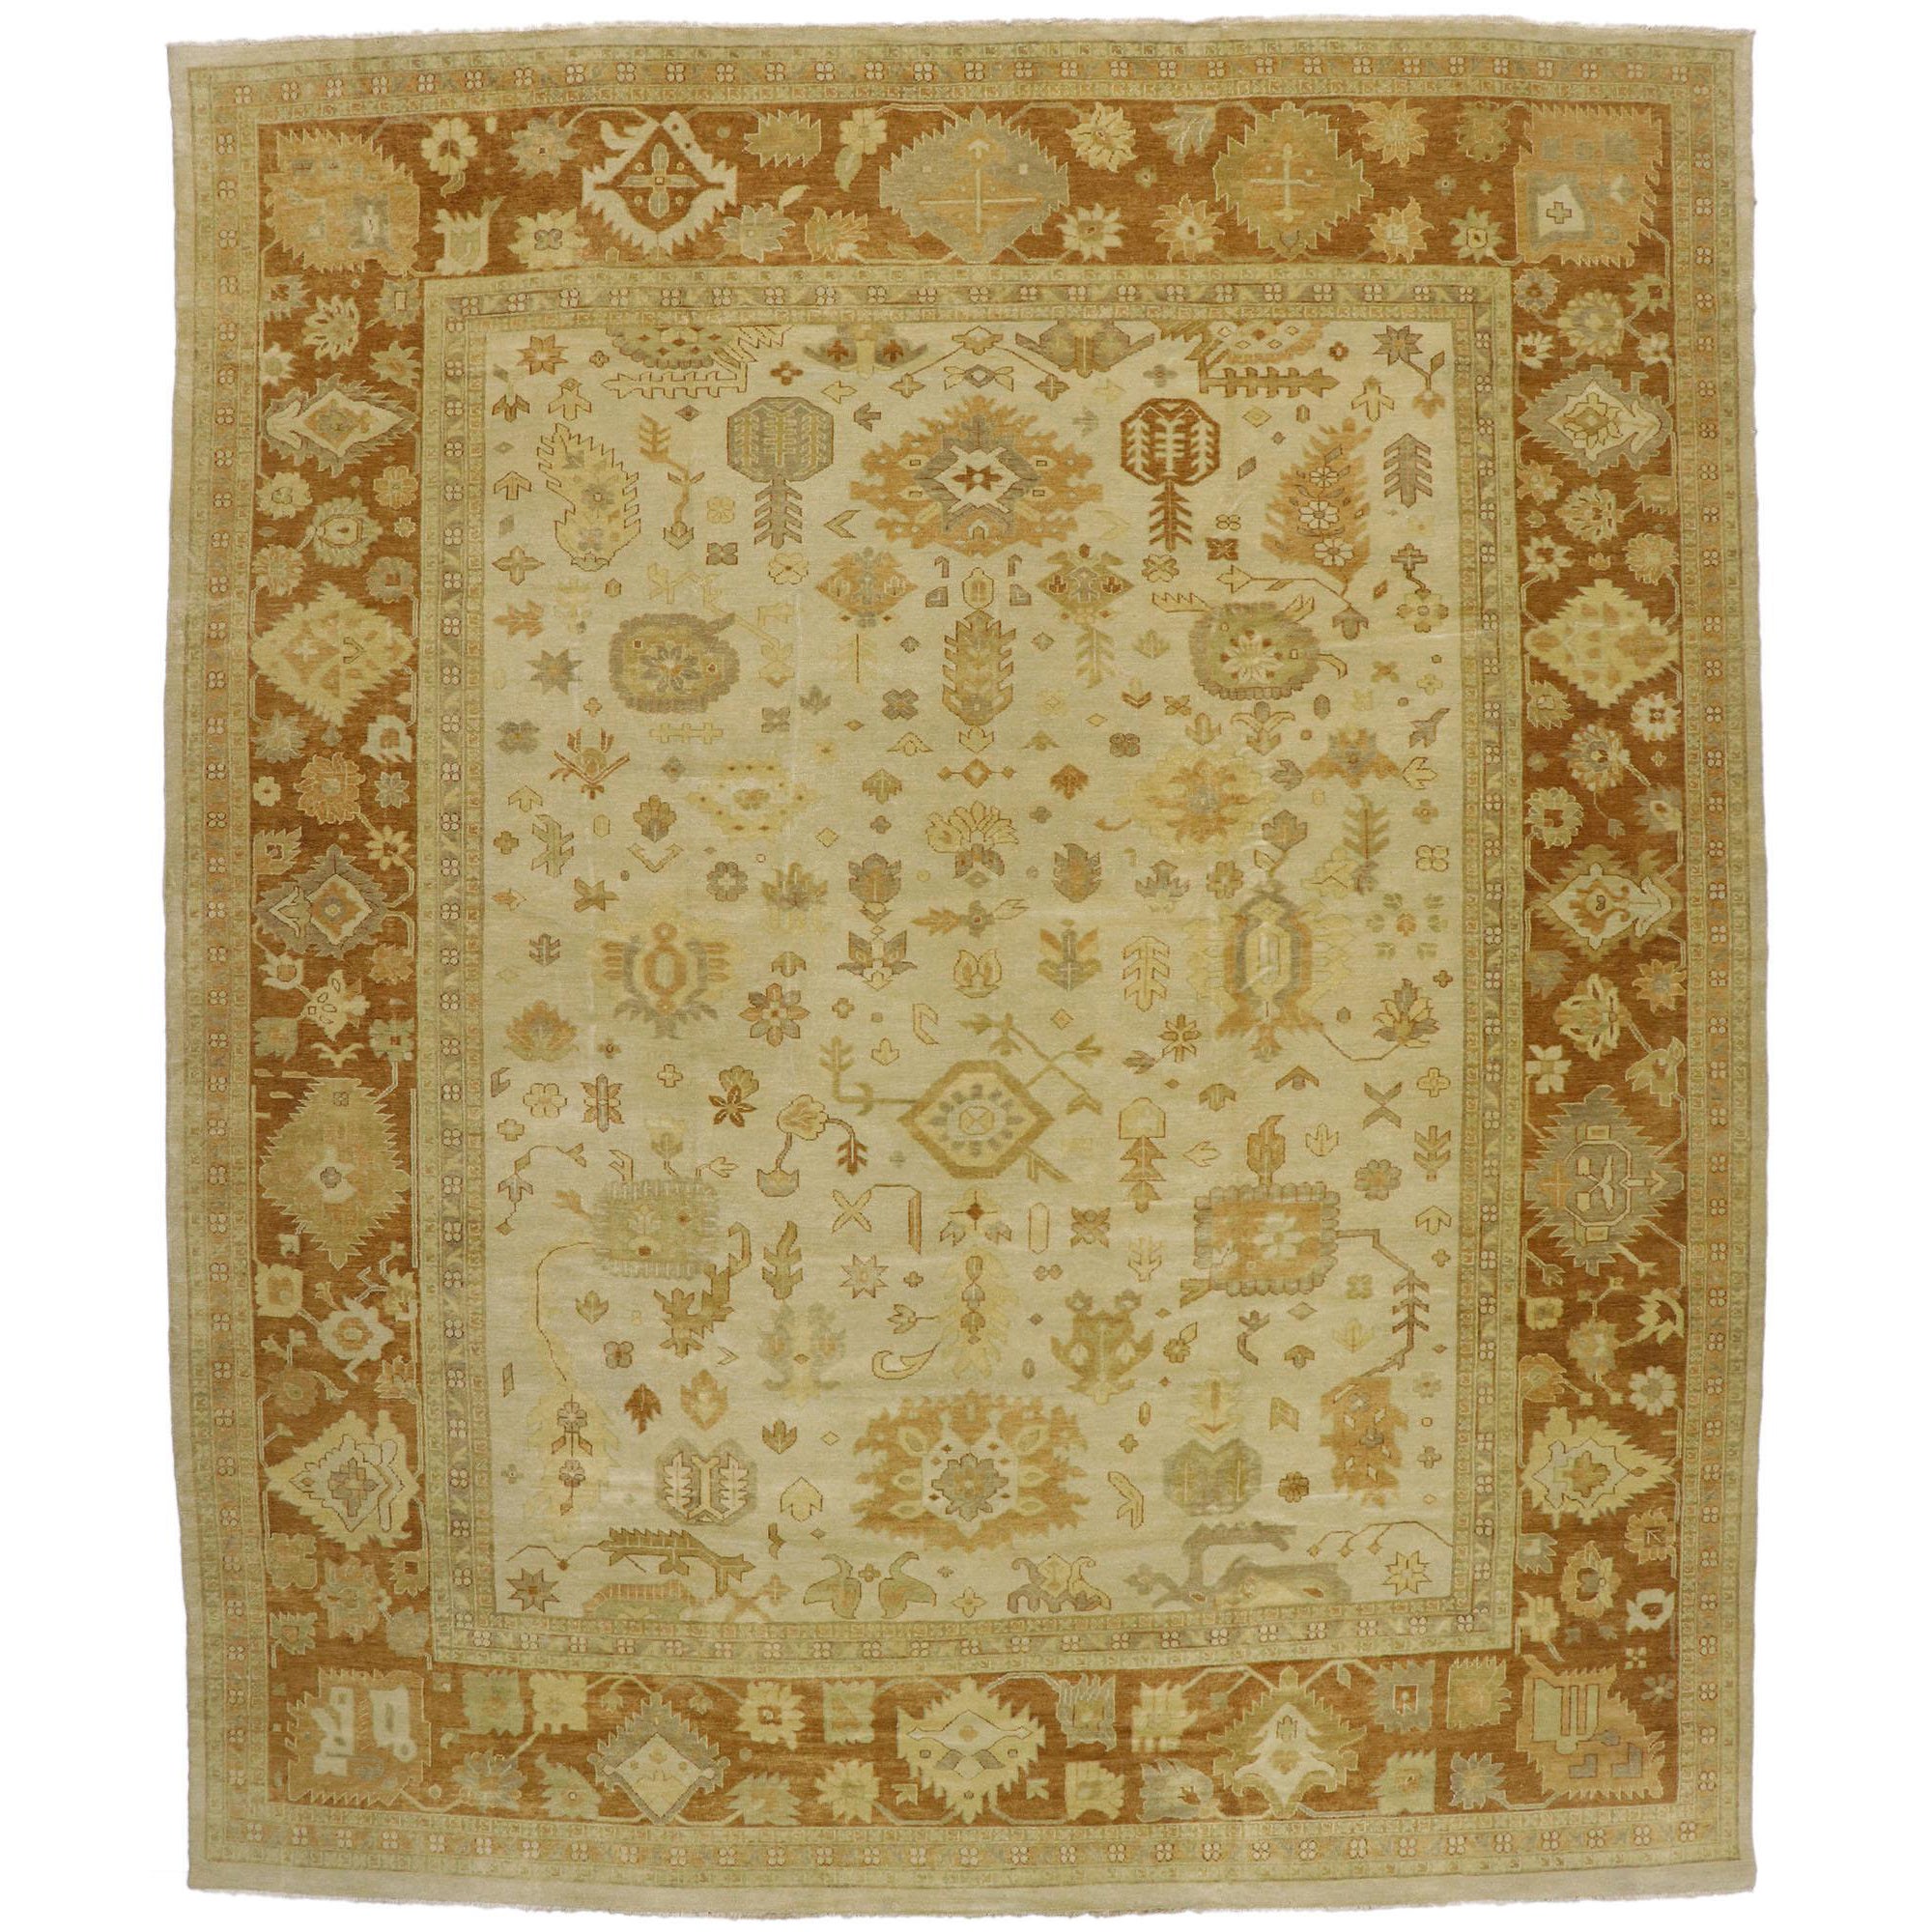 New Contemporary Indian Oushak Rug with Rustic Cottage Southern Living Style